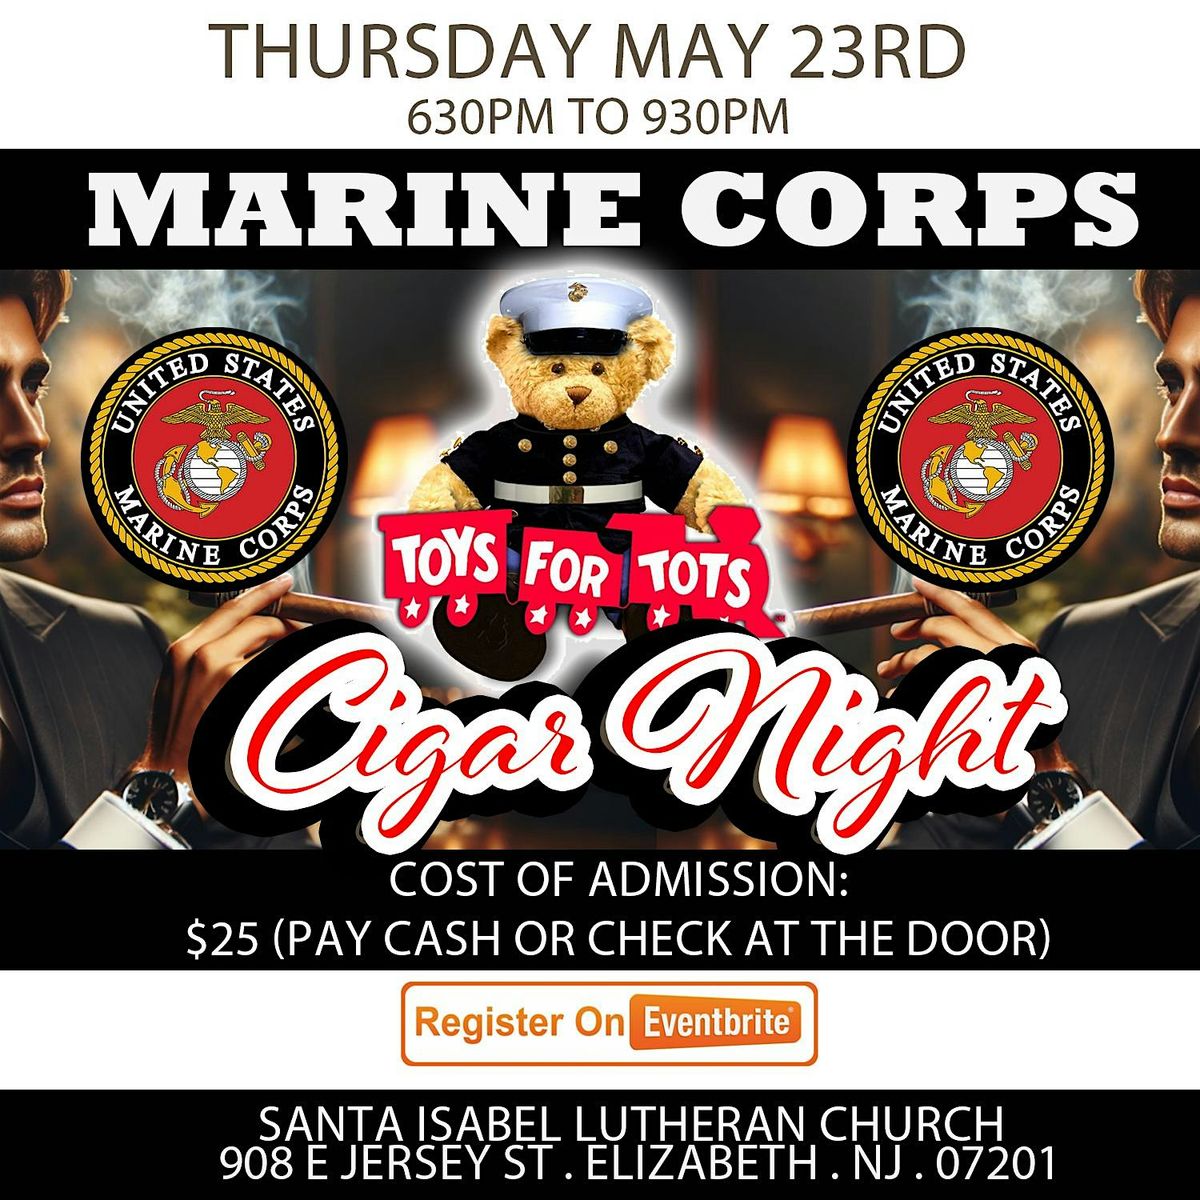 Marine Corps Toys for Tots Cigar event fundraiser